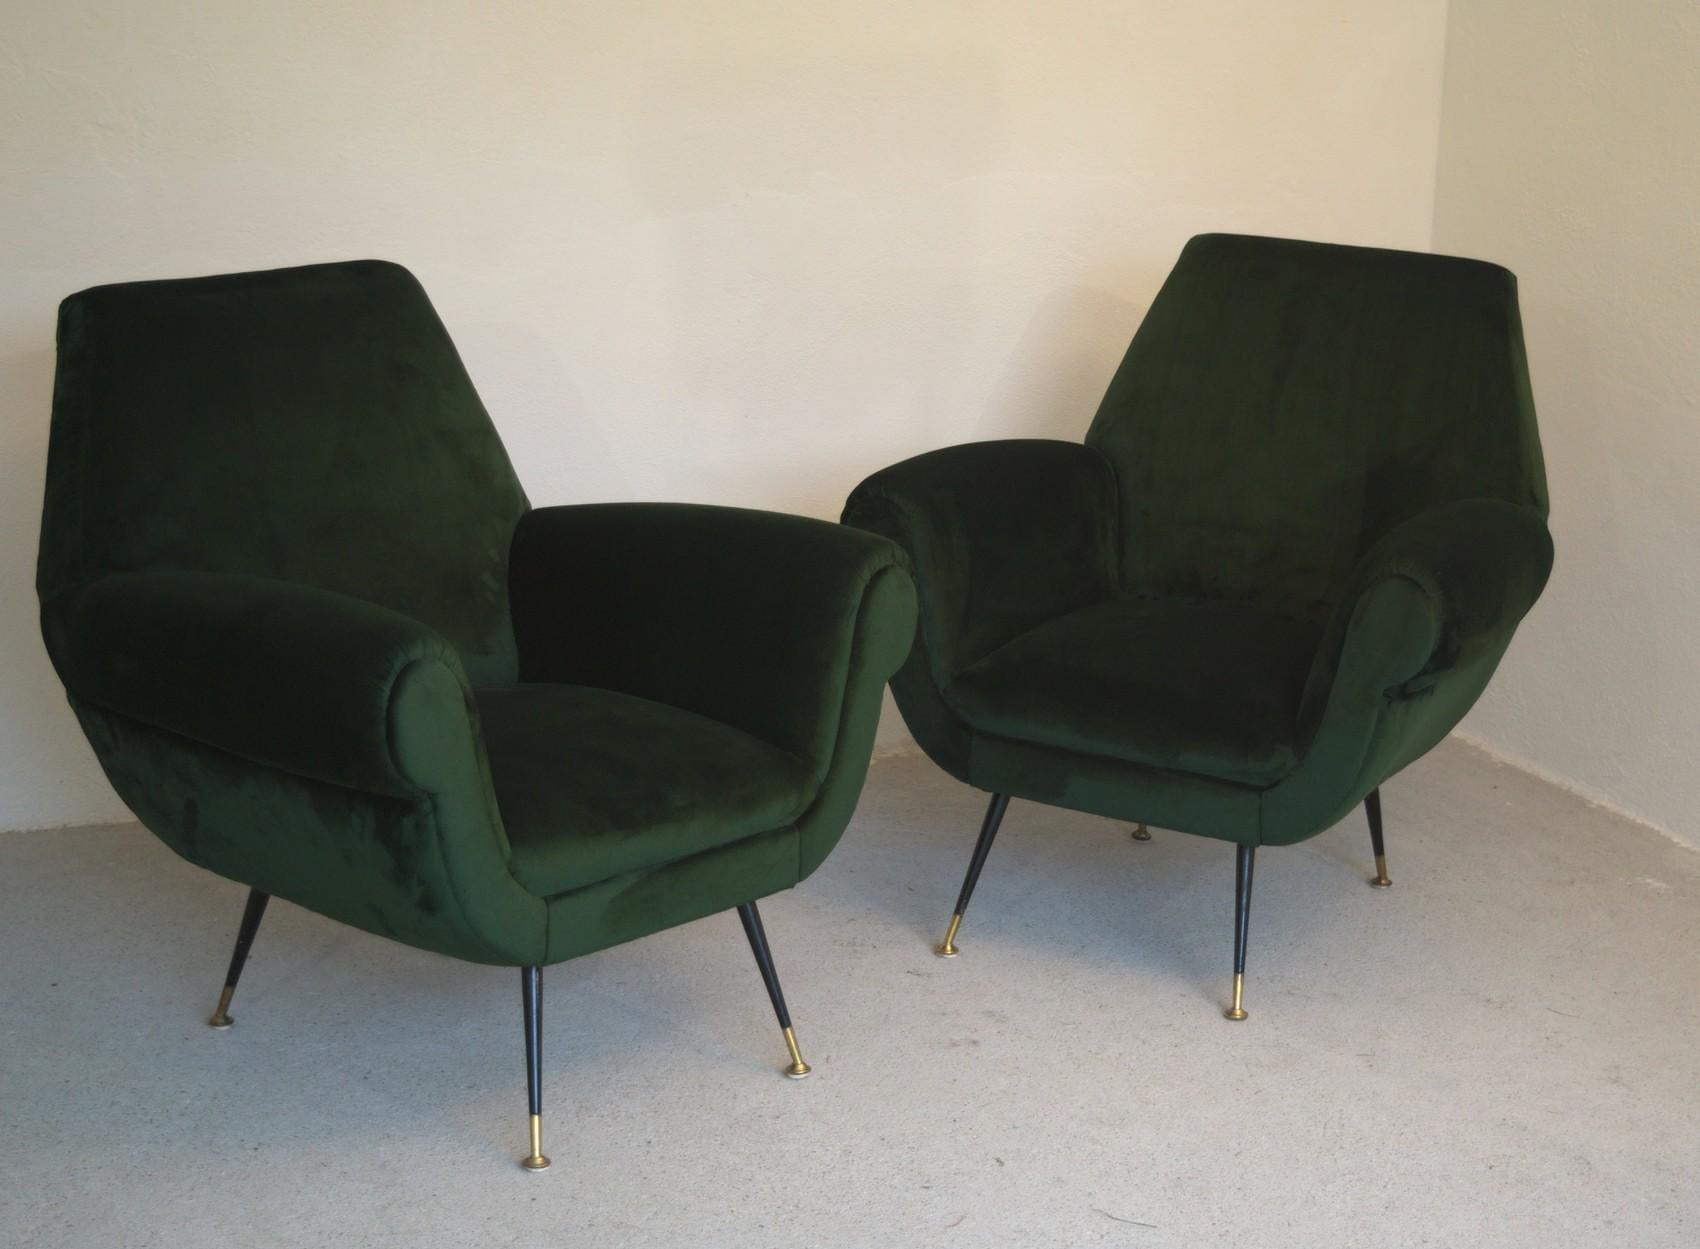 Two armchairs designed by Gigi Radice. Made by Minotti in the 1950s.

From a villa in Padua, wood structure was made firm, padding replaced, belt replaced and upholstered with an Italian woven green high pile soft deep forest green writing velvet.